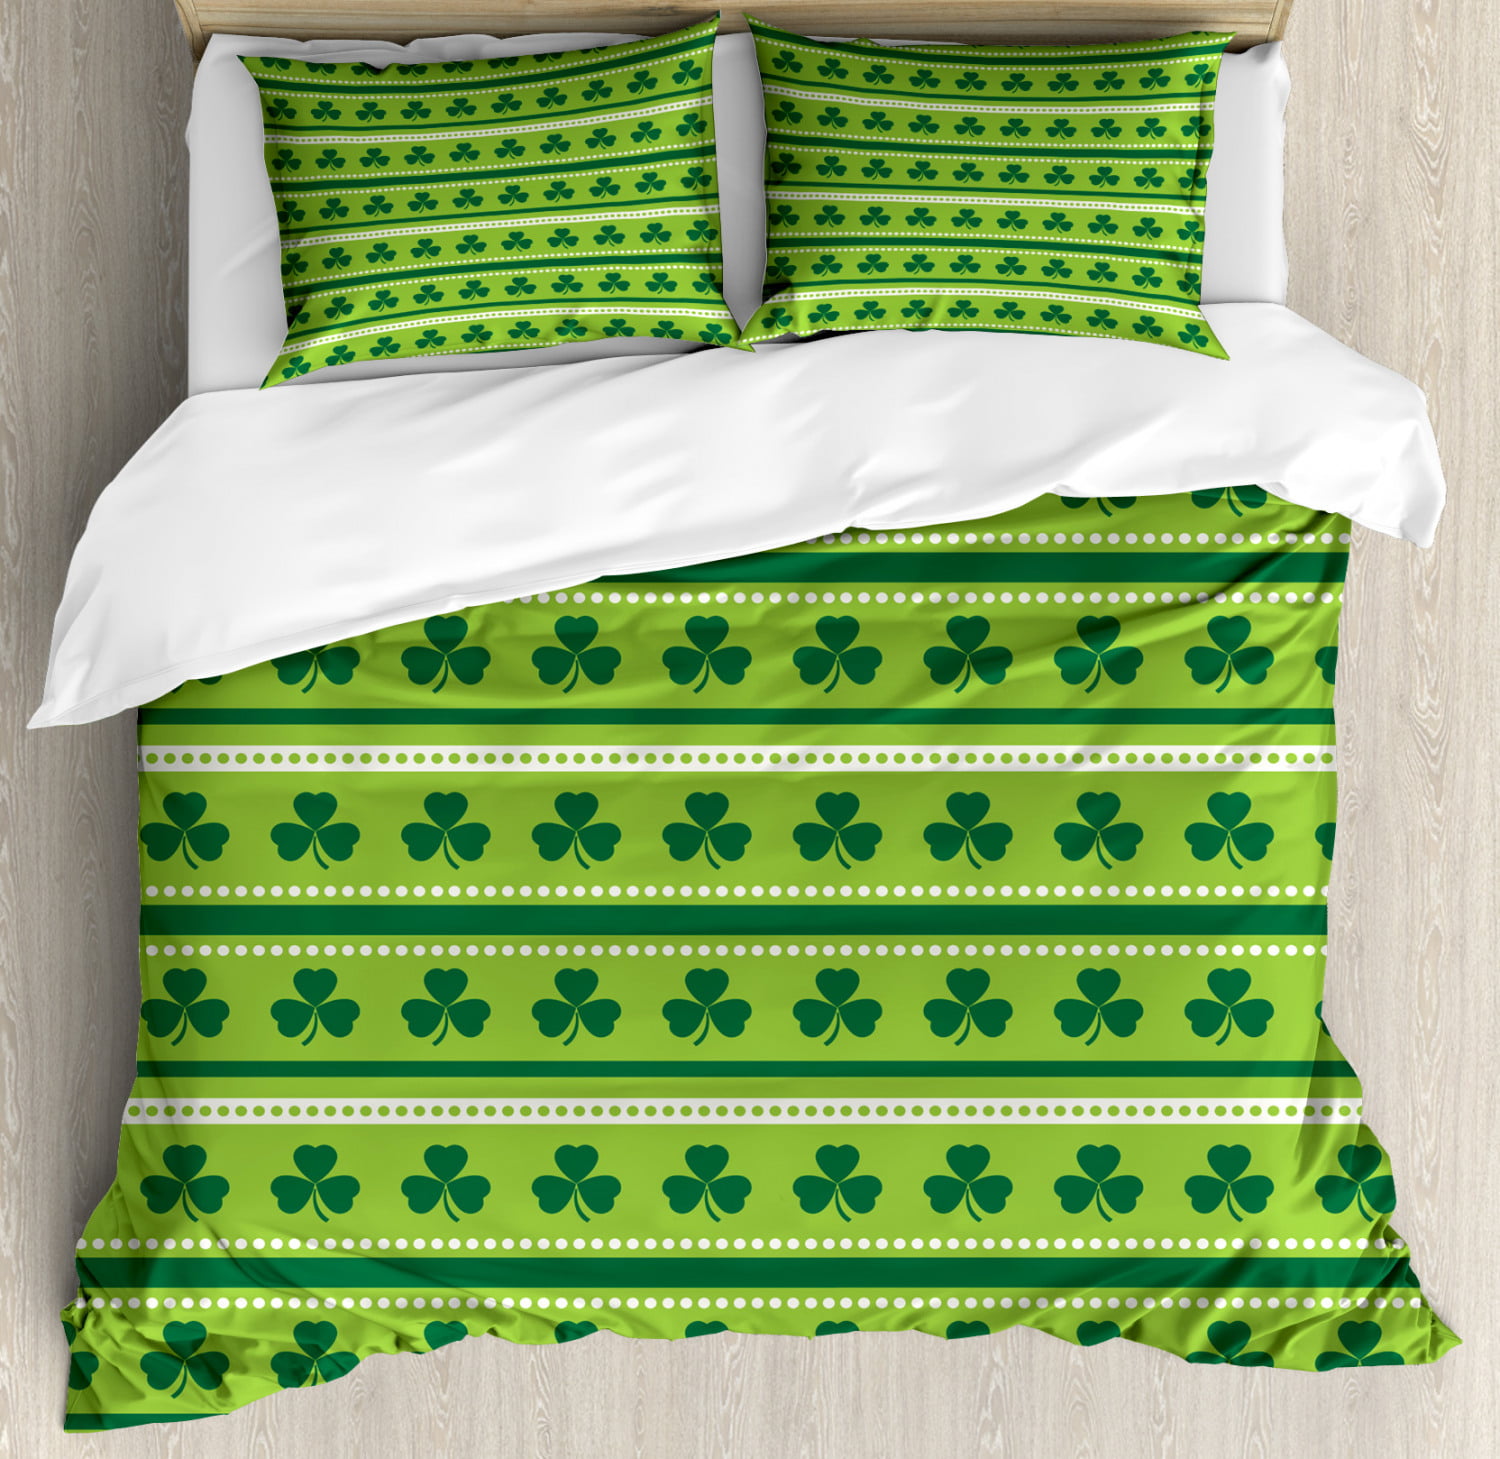 Green Duvet Cover Set Traditional Irish Pattern With Clovers